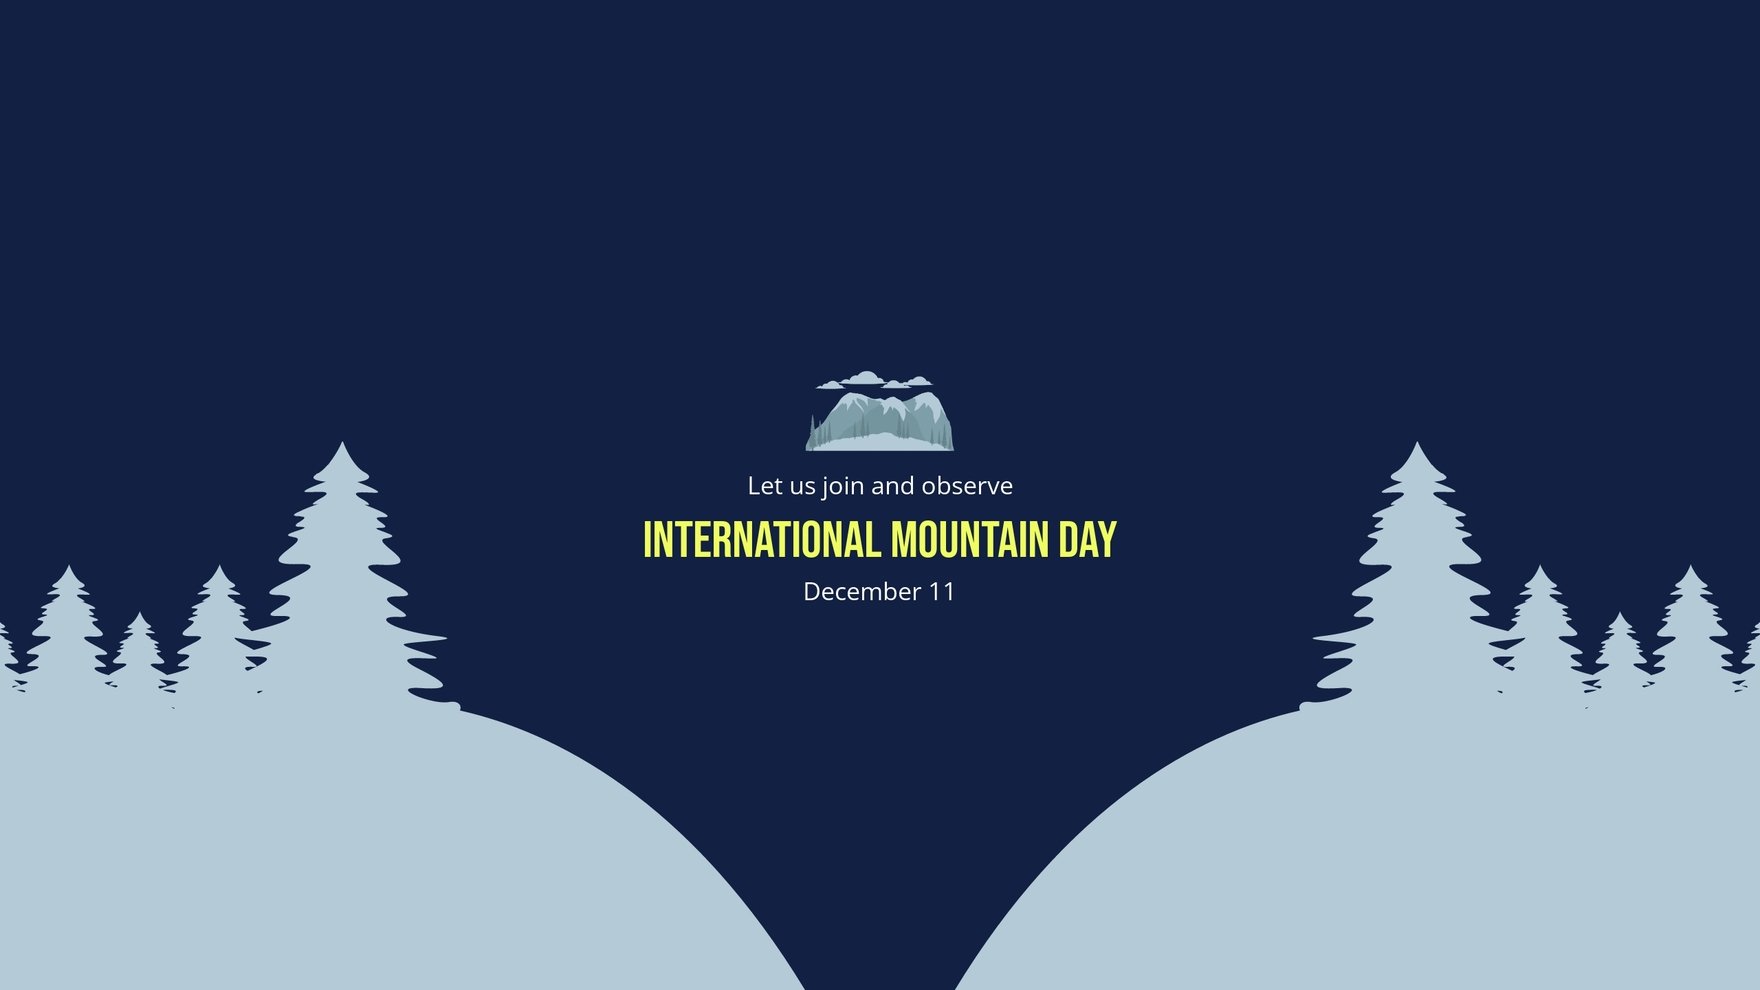 International Mountain Day Youtube Banner Template